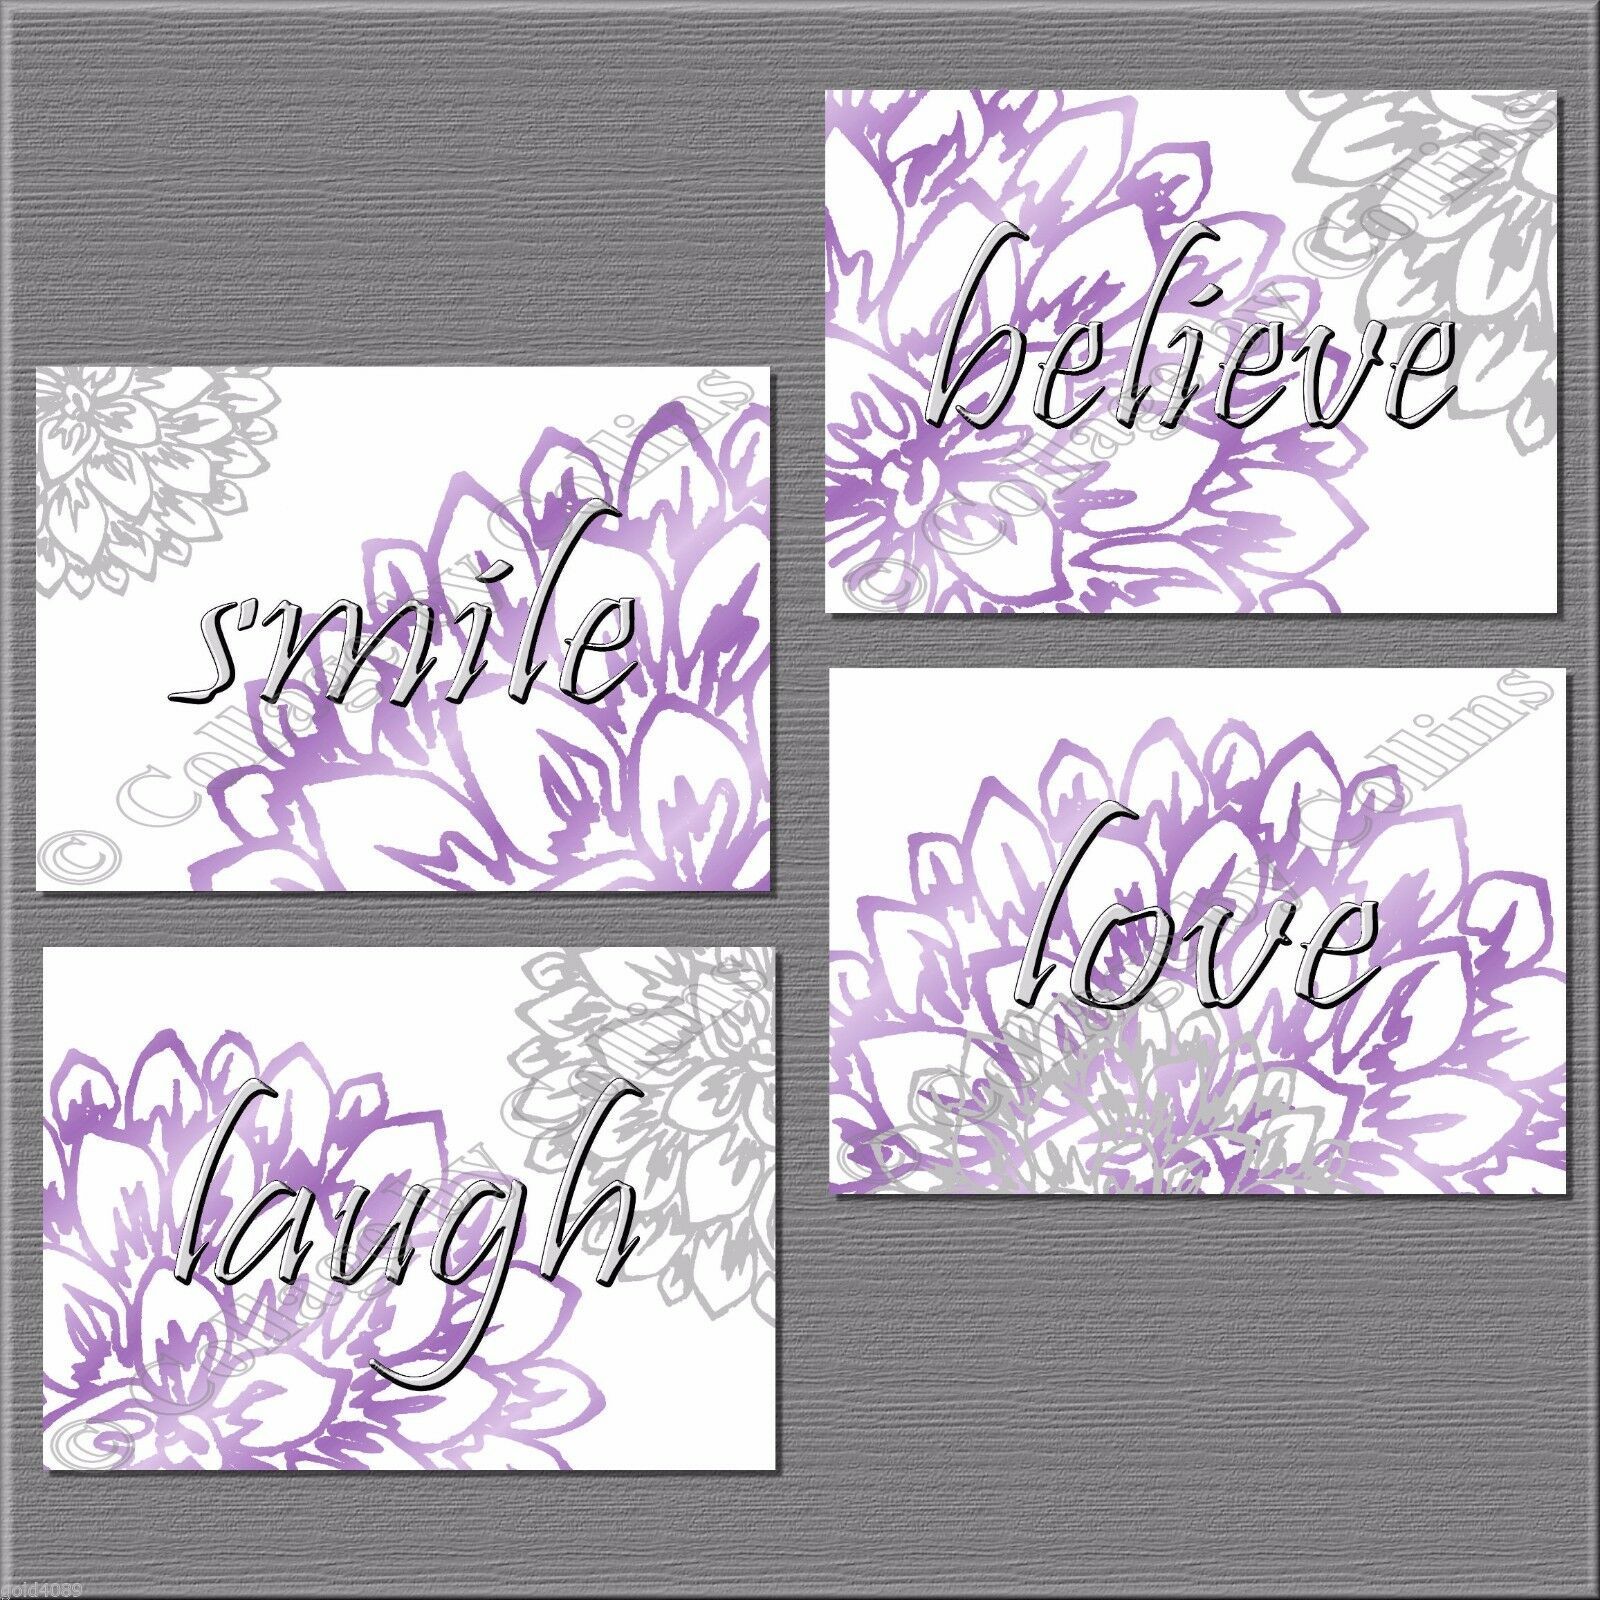 Primary image for Gray Purple Flower Inspire Wall Art Picture Print Decor Laugh Love Believe Smile